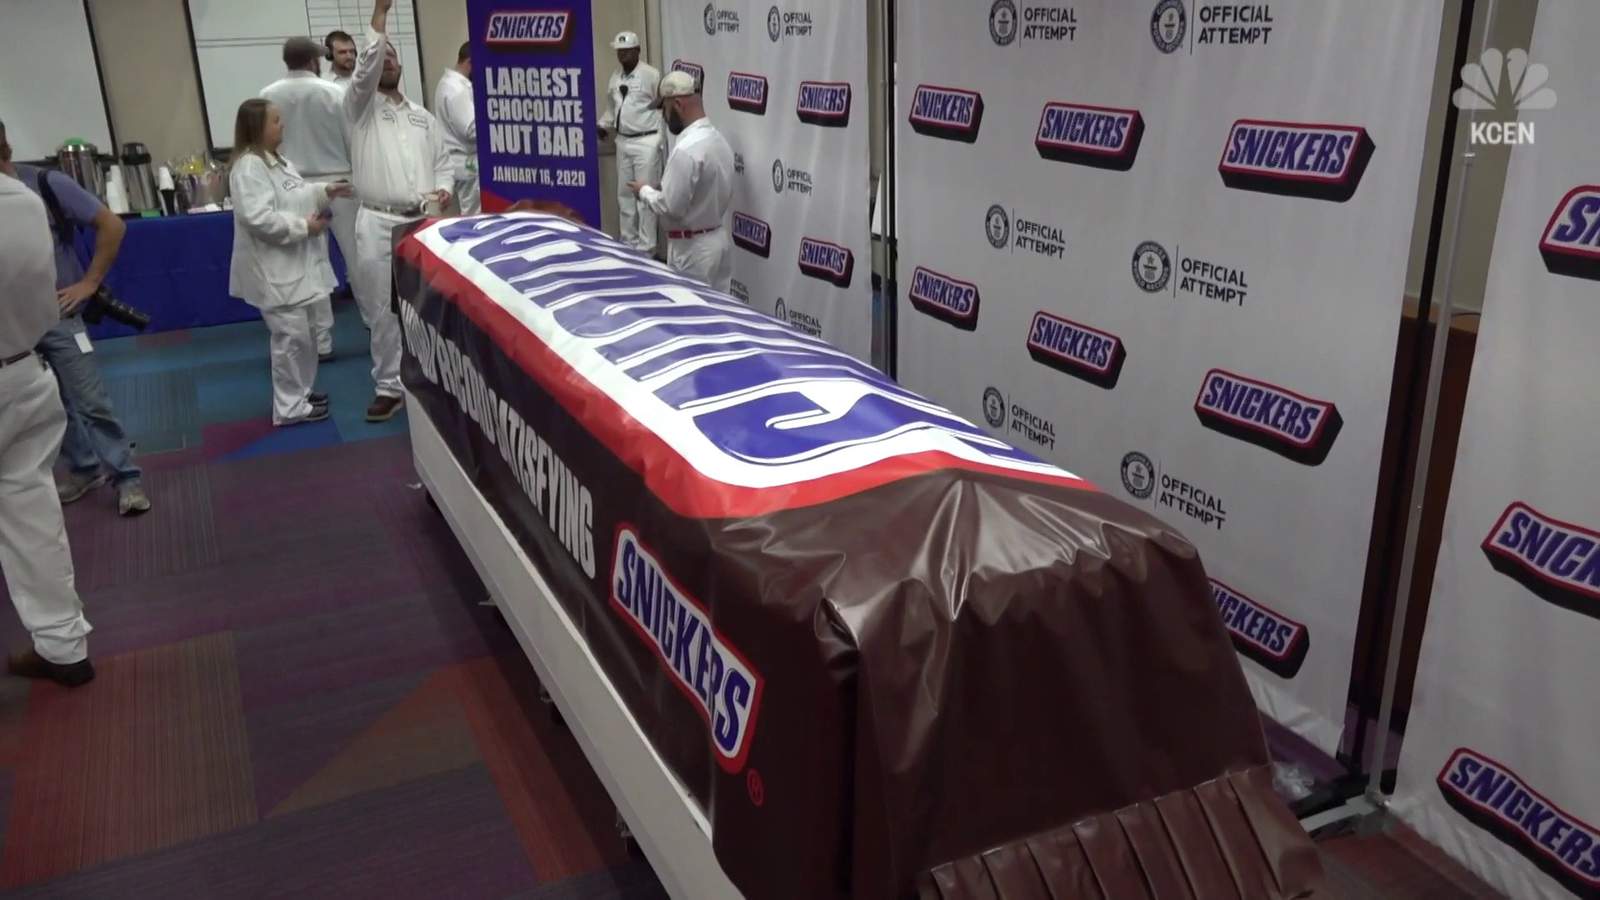 World’s largest Snickers bar weighs in at over 2 tons in Texas